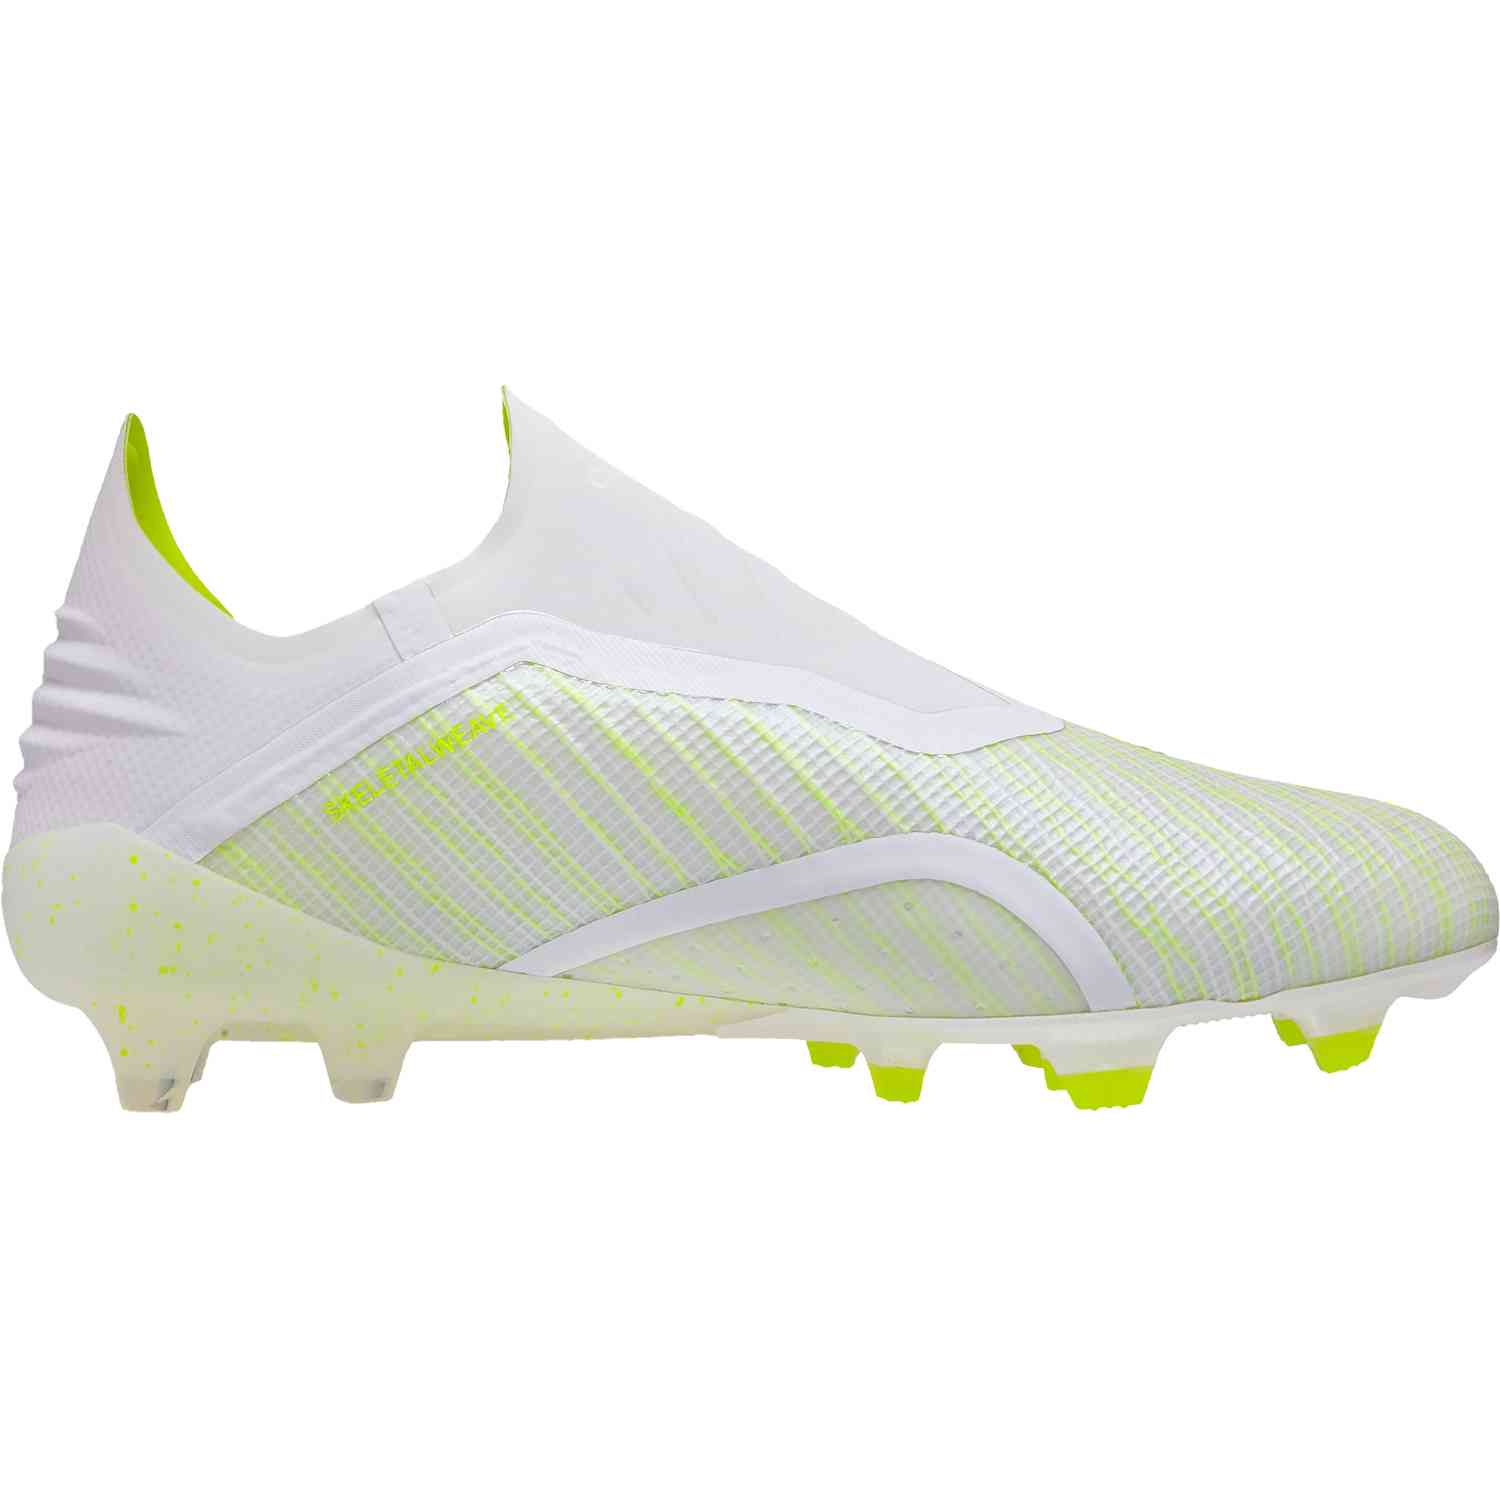 x18 soccer cleats